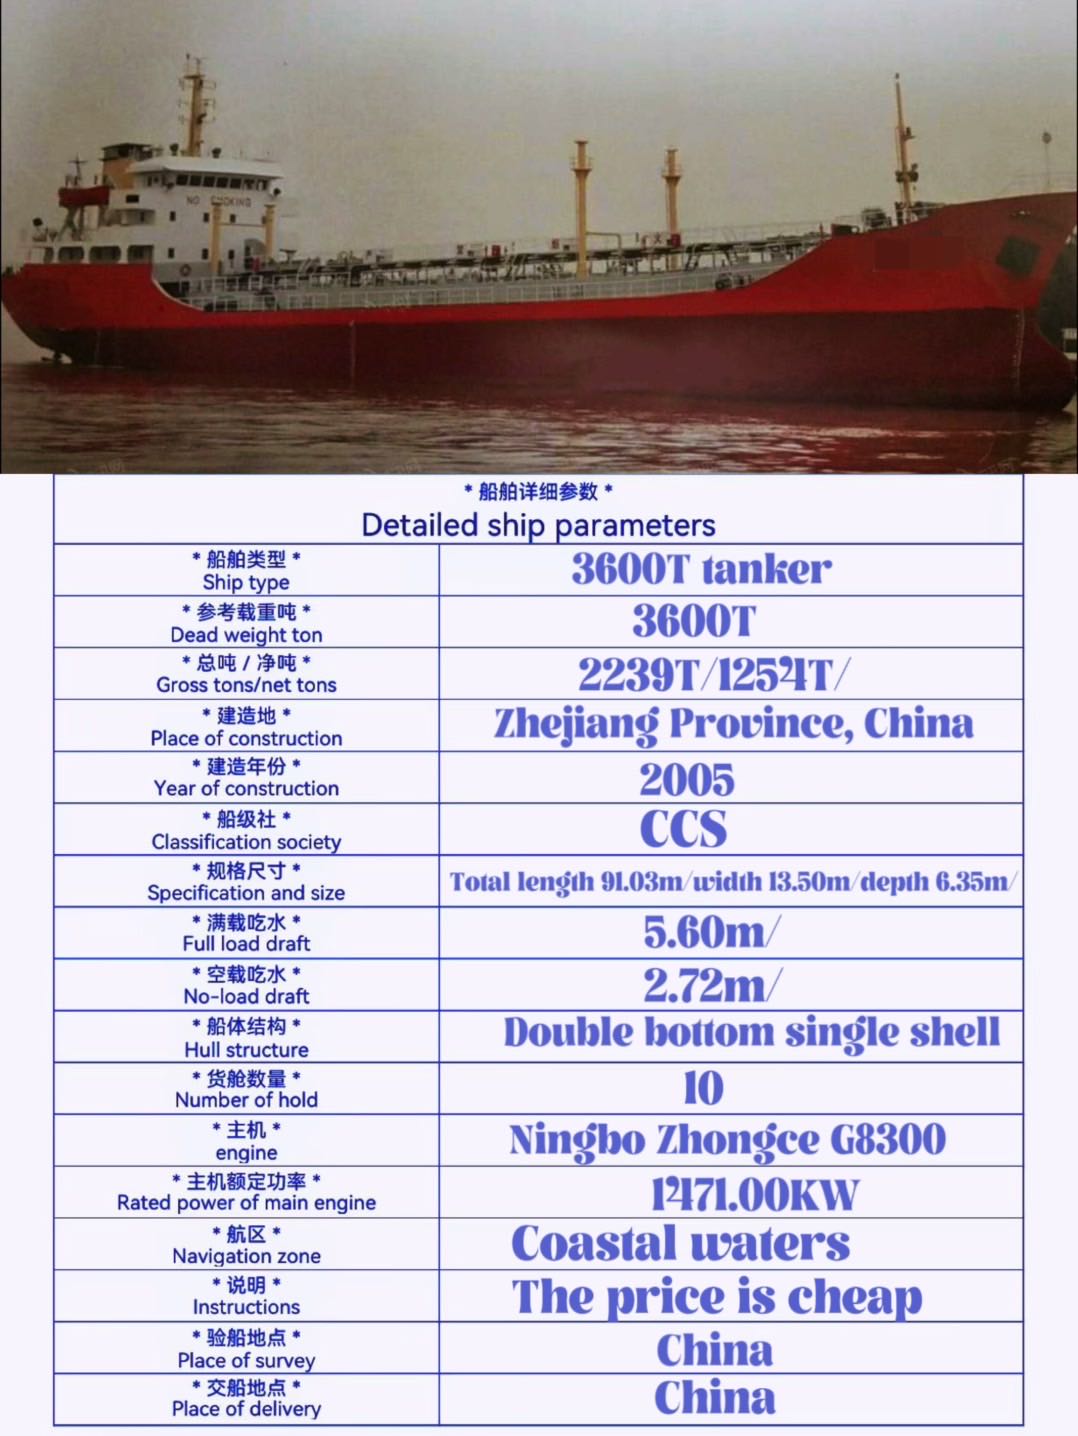 For sale: 3600T oil tanker, built in Zhejiang, China in 2005.